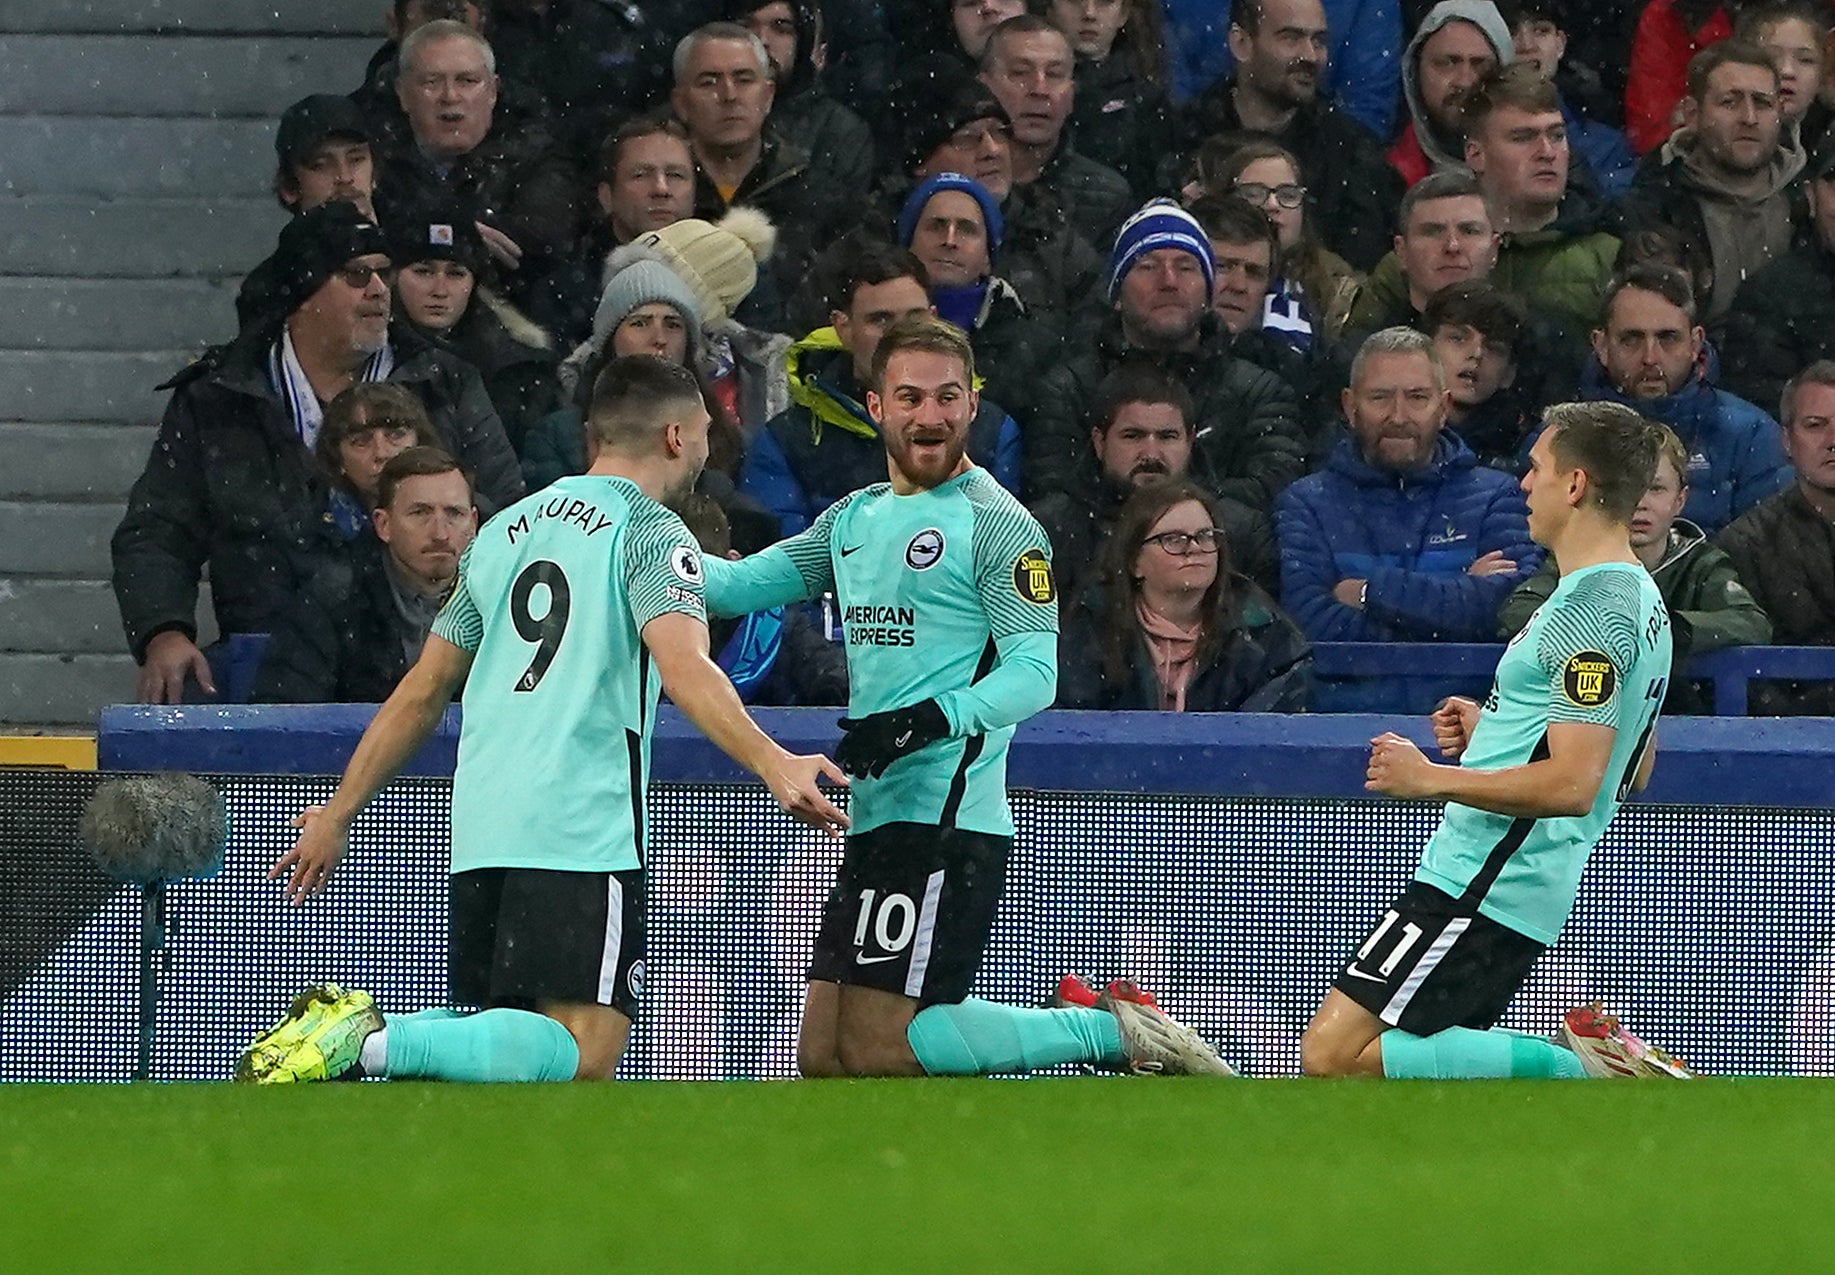 The Seagulls move up to eighth with this win as Everton’s miserable form continues